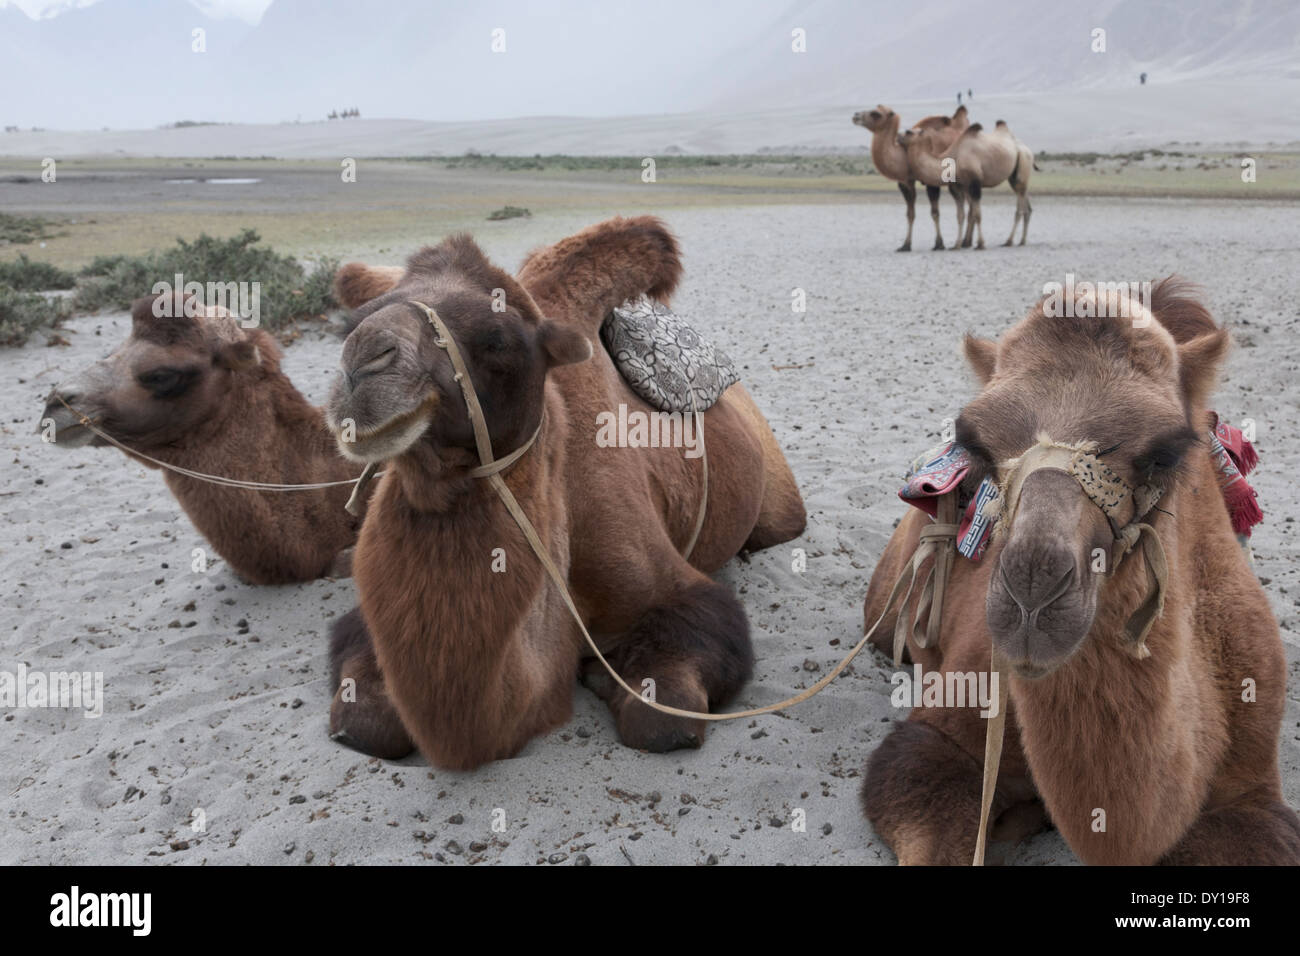 Ladakh, India. Bactrian camels used for tourist rides, Nubra Valley sand dunes, near Hunder Town Stock Photo